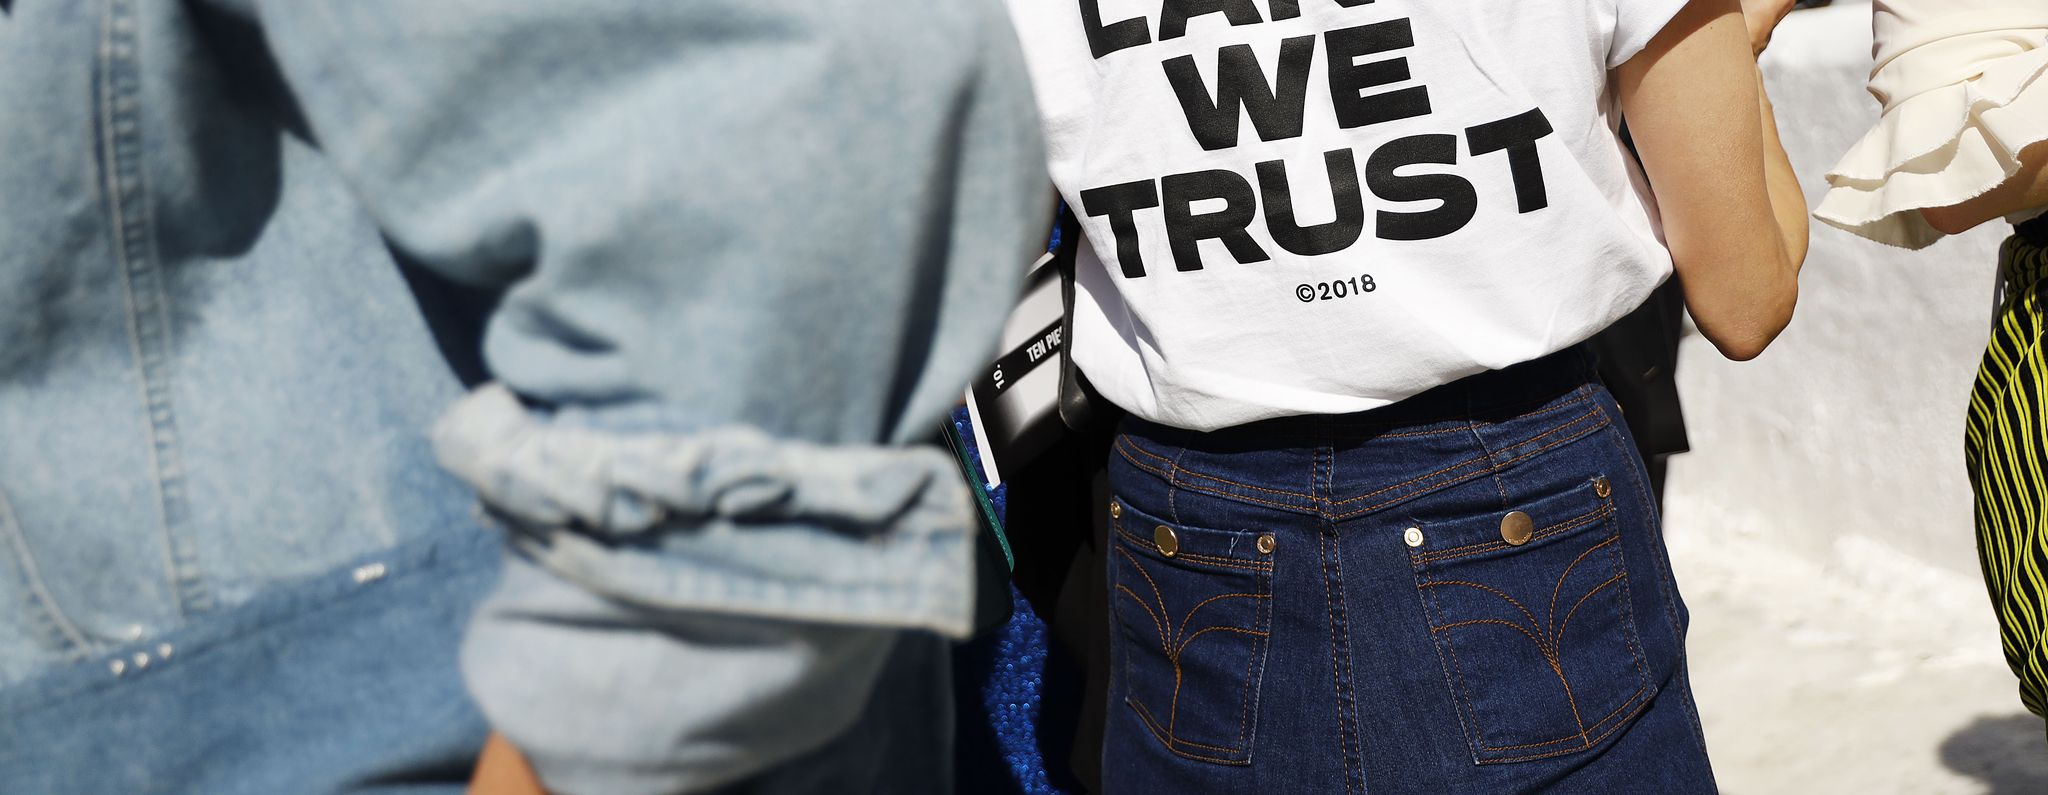 People, Jeans, Youth, Denim, Human, T-shirt, Protest, Textile, Tree, Outerwear, 